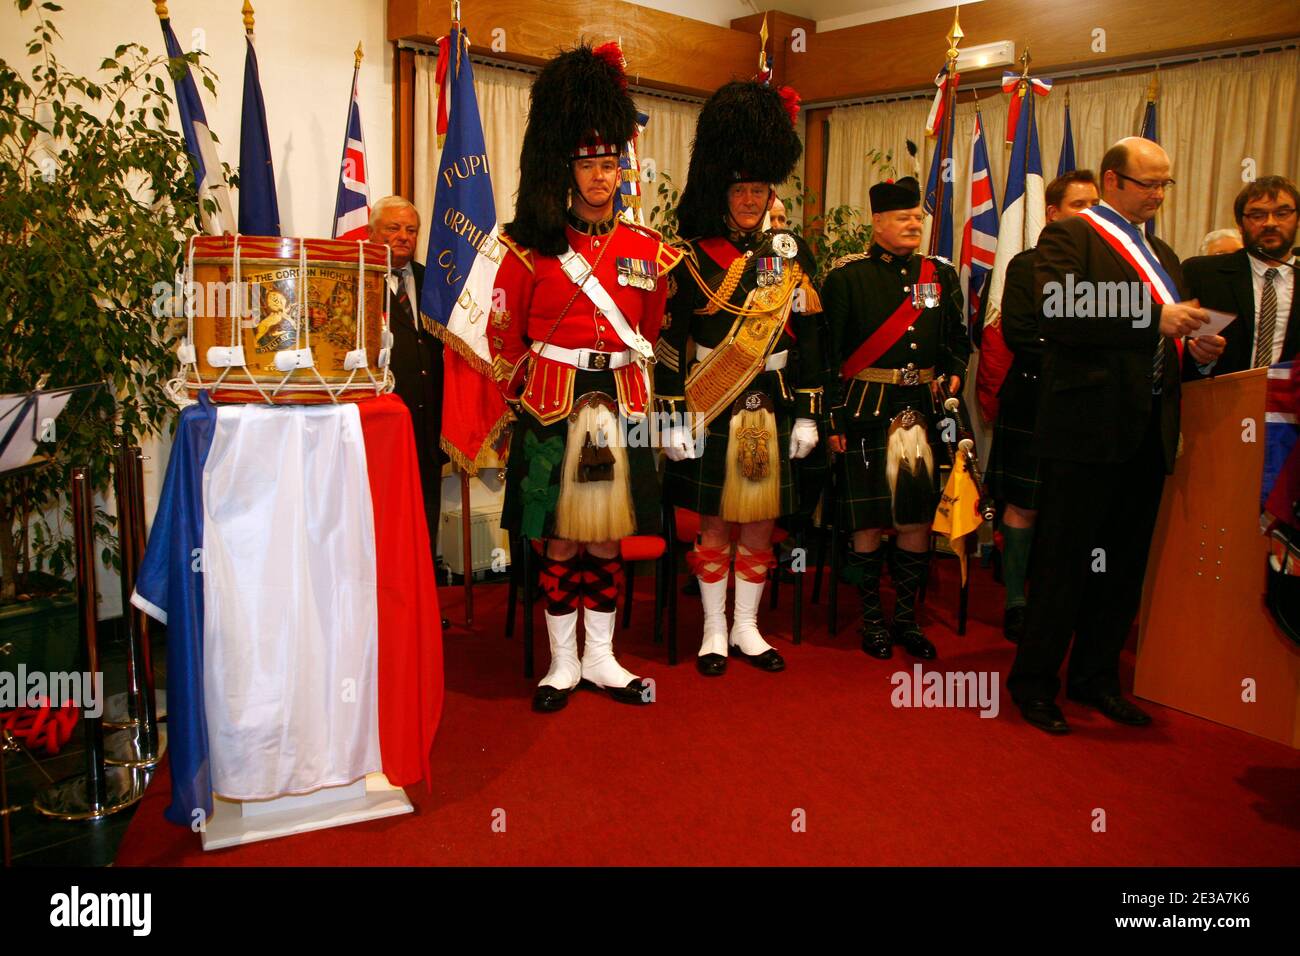 The Gordon Highlanders drum, which was was buried in a farmer's field by a British soldier of the 4th Battalion as the Gordons, during the British Army's retreat to Dunkirk in the Second World War, is made ready to be returned representatives of the Gordon Highlanders Museum based in Aberdeen, Scotland, at a ceremony held in Hem, northern France on 12 November 2010. Media reports state that it has been revealed that, within hours of the 4th Battalion as the Gordons leaving the village of Hem in northern France, during their retreat to the Dunkirk beachhead the drum was found by French policema Stock Photo